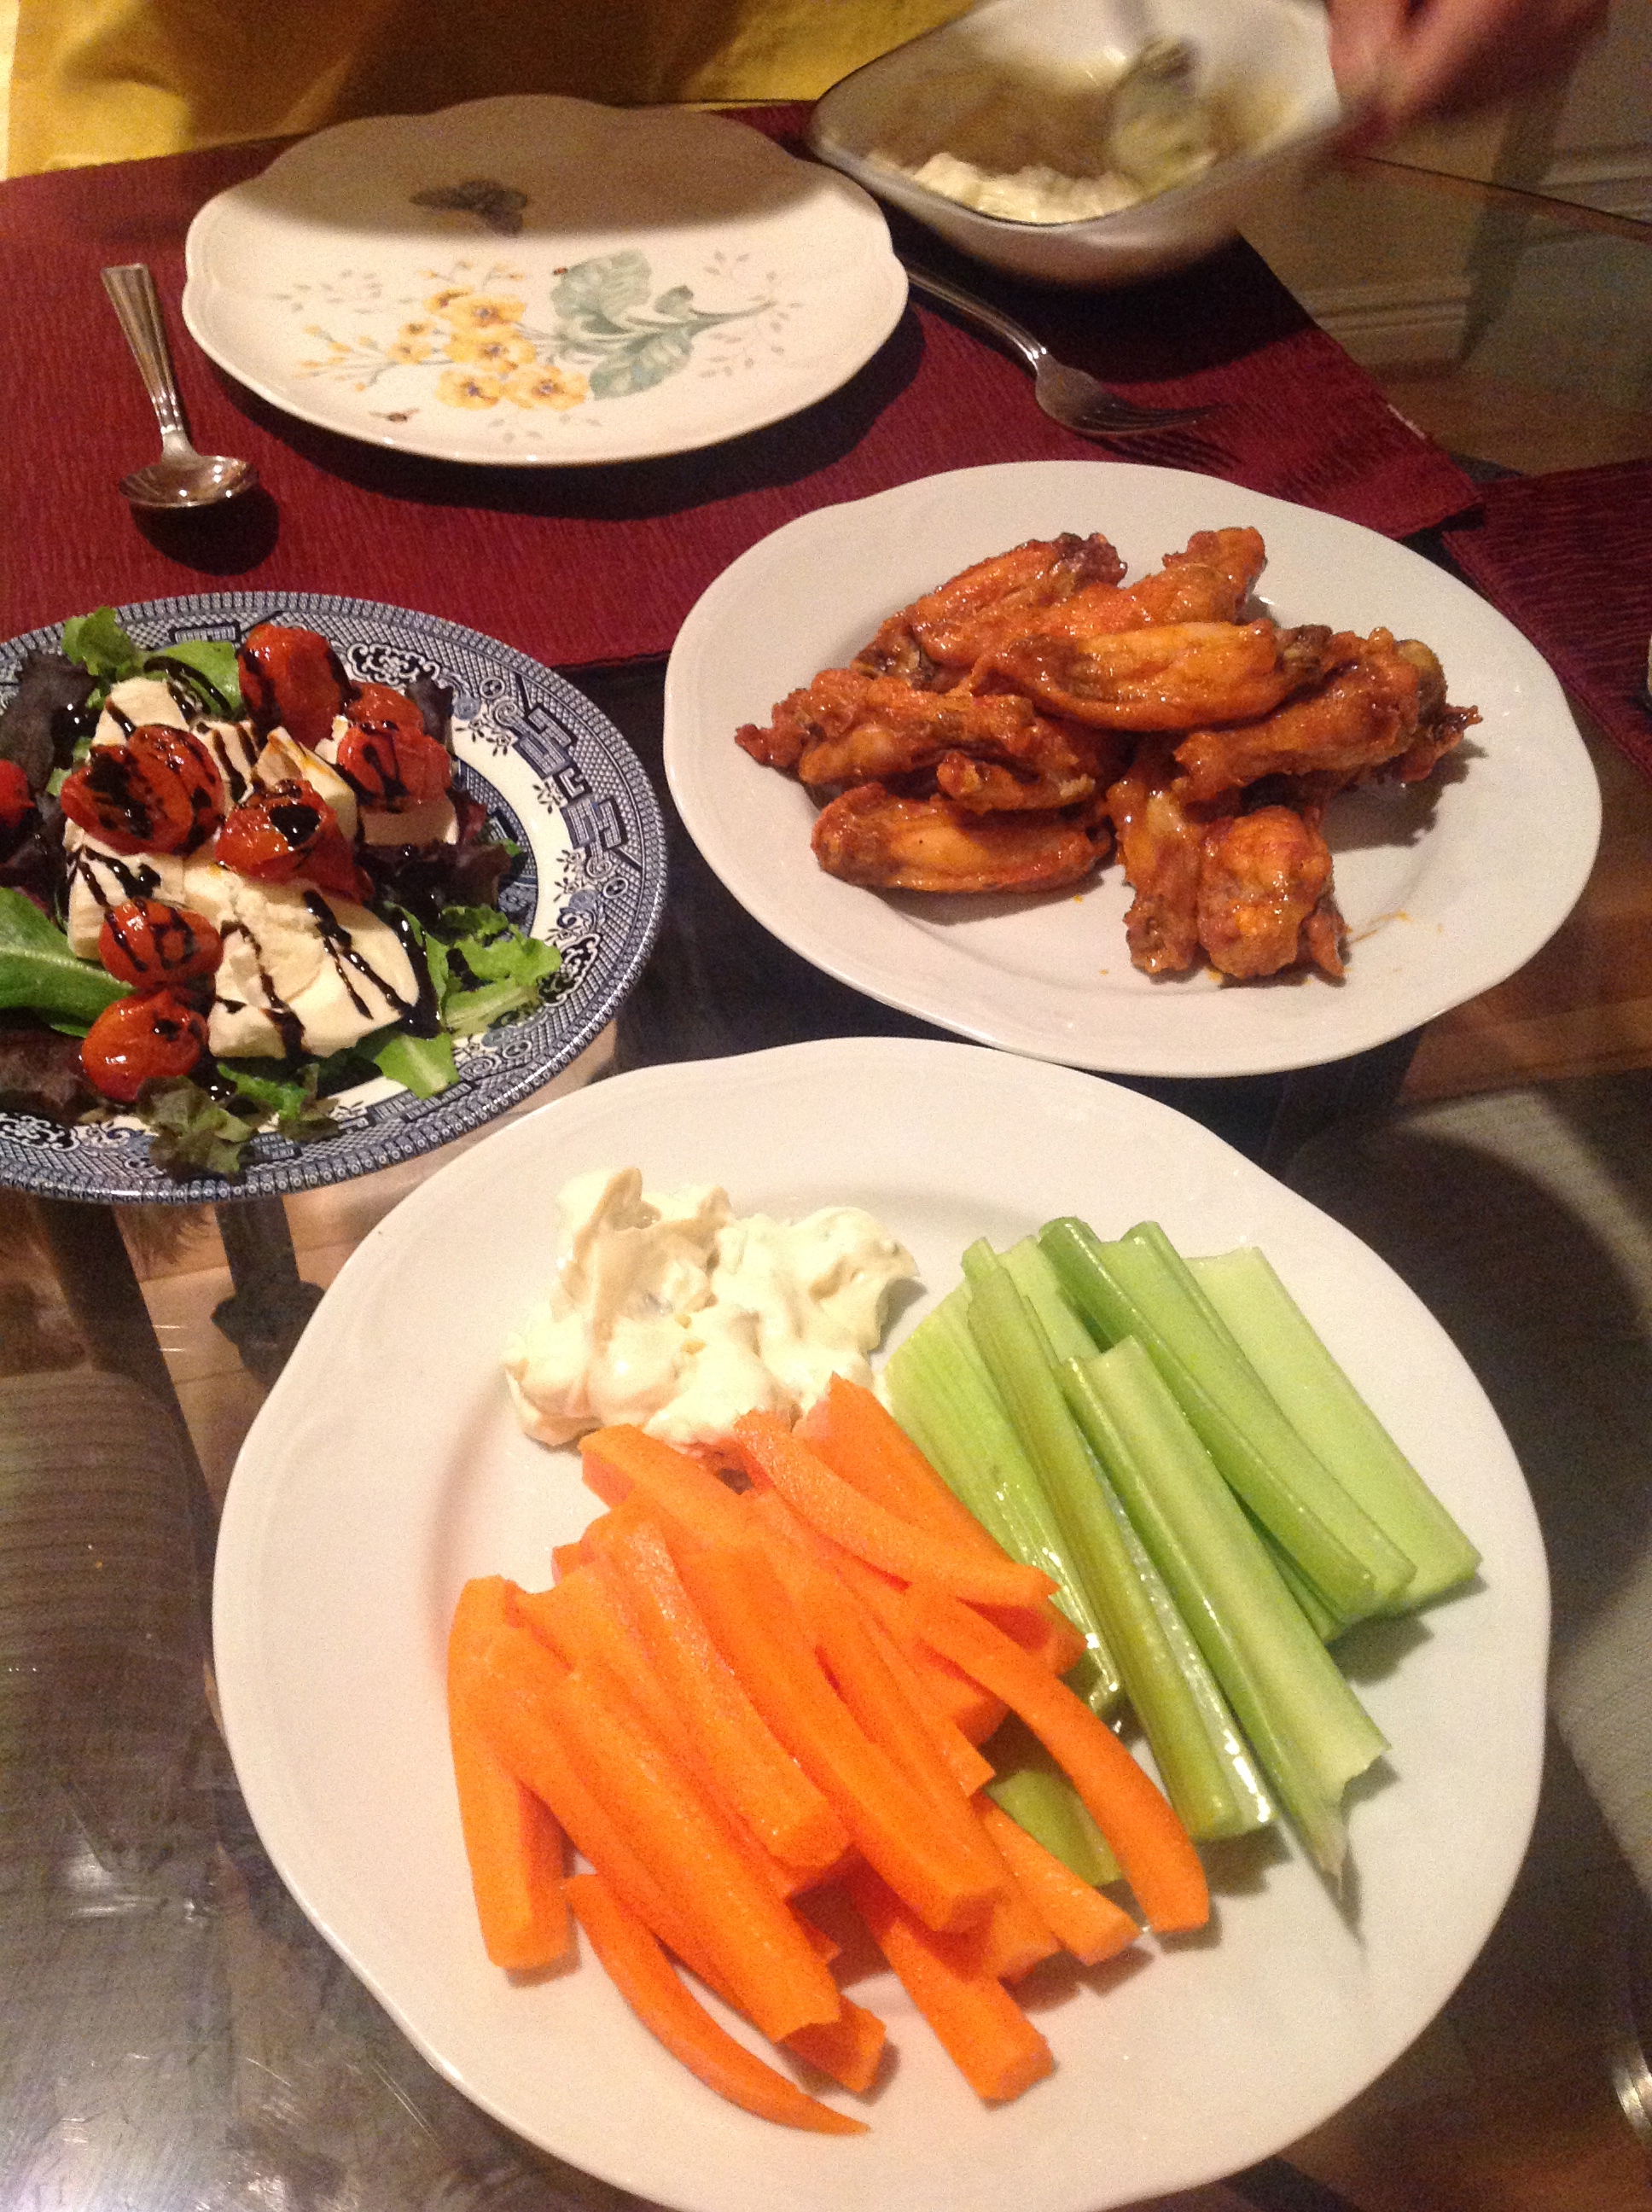 Hubs requested chicken wings this week. I also made caprese salad